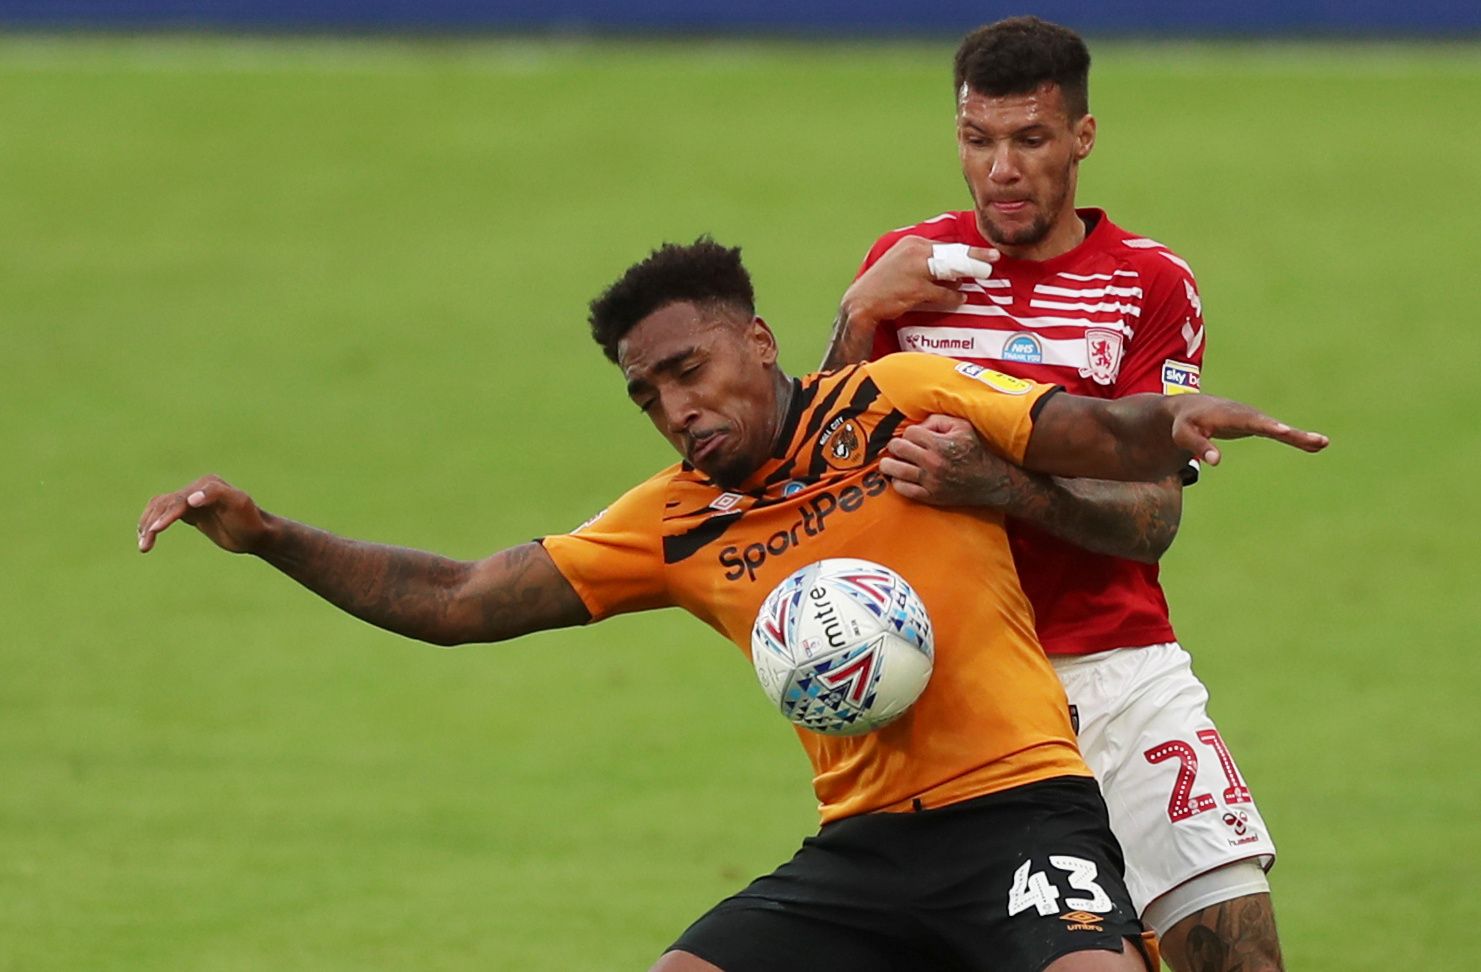 Soccer Football - Championship - Hull City v Middlesbrough - KCOM Stadium, Hull, Britain - July 2, 2020  Middlesbrough's Marvin Johnson in action with Hull City's Mallik Wilks, as play resumes behind closed doors following the outbreak of the coronavirus disease (COVID-19)   Action Images/Lee Smith    EDITORIAL USE ONLY. No use with unauthorized audio, video, data, fixture lists, club/league logos or 